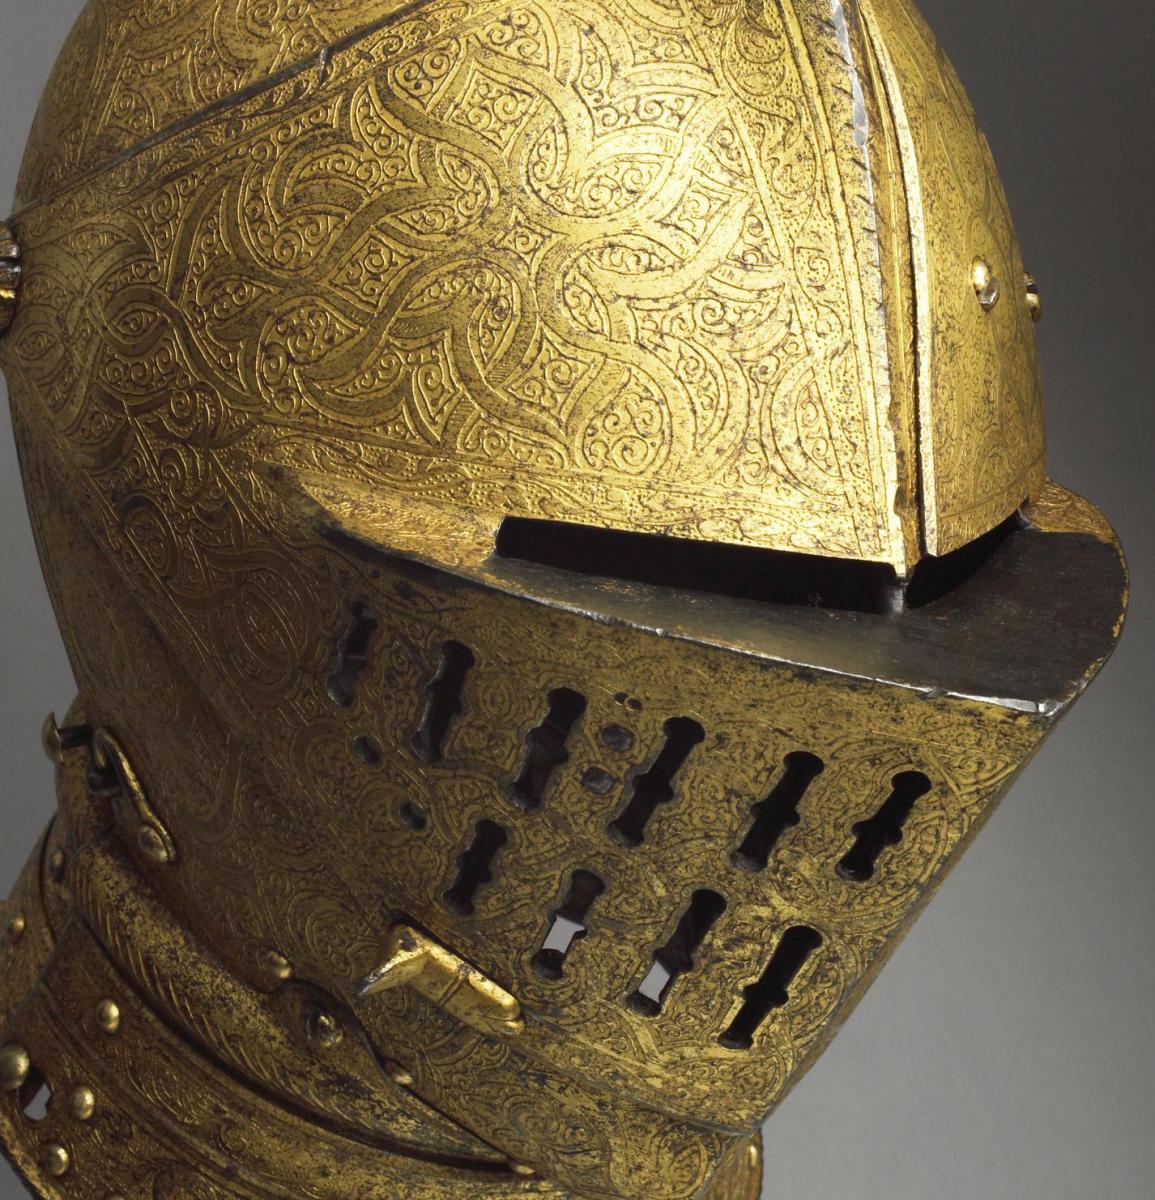 Parts of a Field Armour - The Wallace Collection